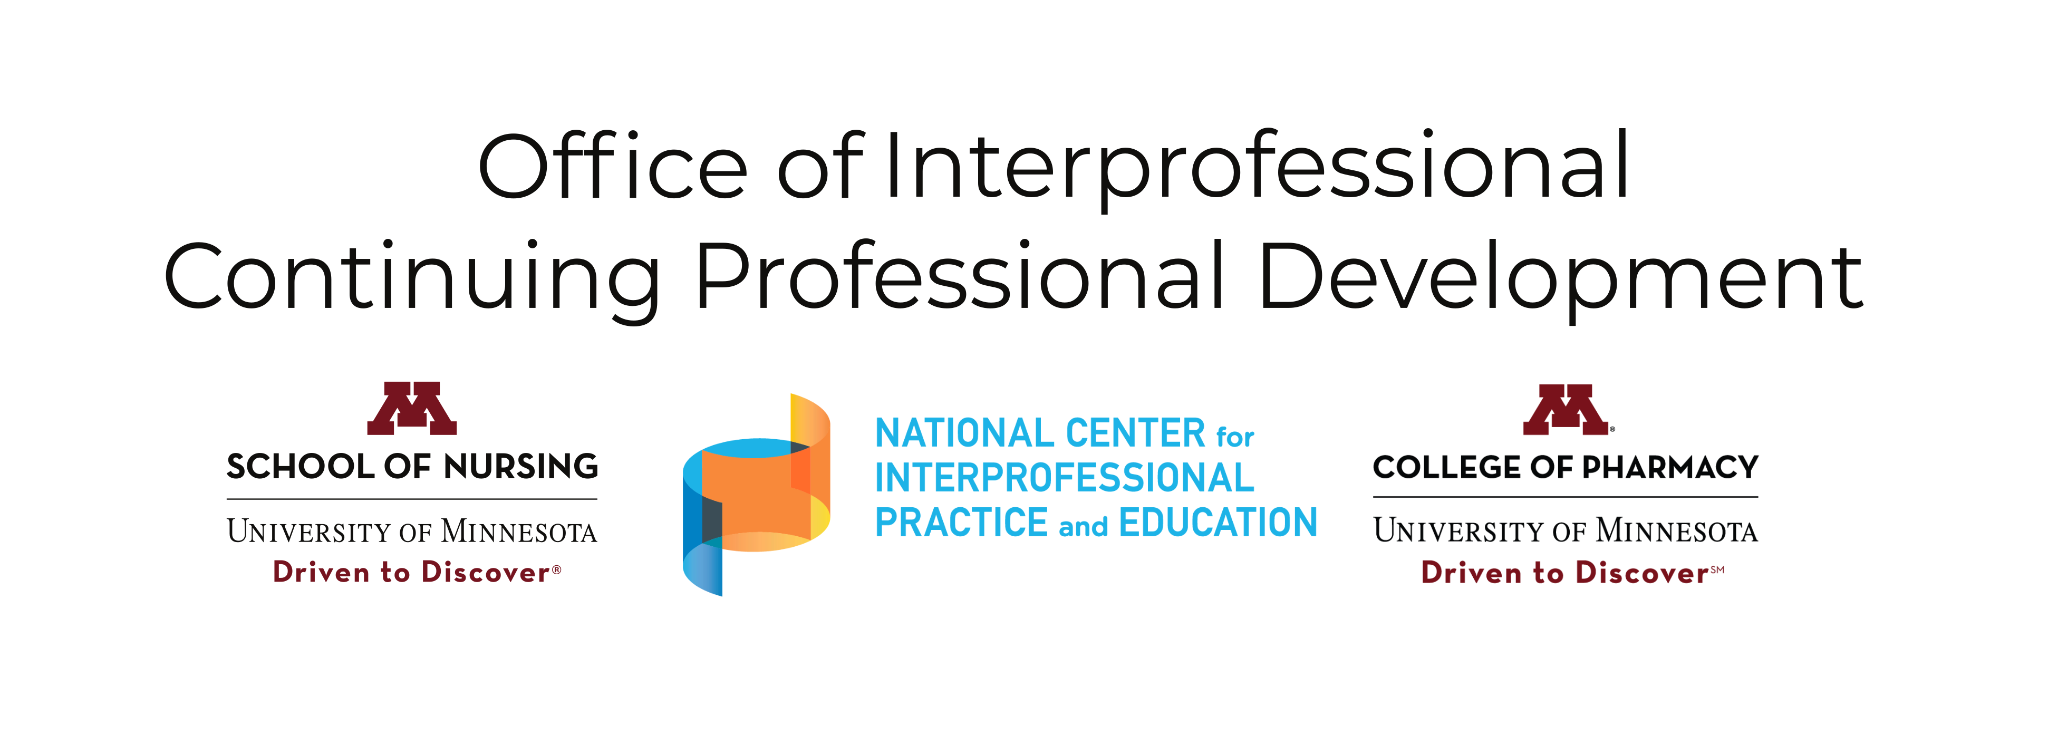 This logo has text above, reading "Office of Interprofessional Continuing Professional Development", with three logos arranged from left to right below for the University of Minnesota School of Nursing, the National Center for Interprofessional Practice and Education, and the University of Minnesota College of Pharmacy.